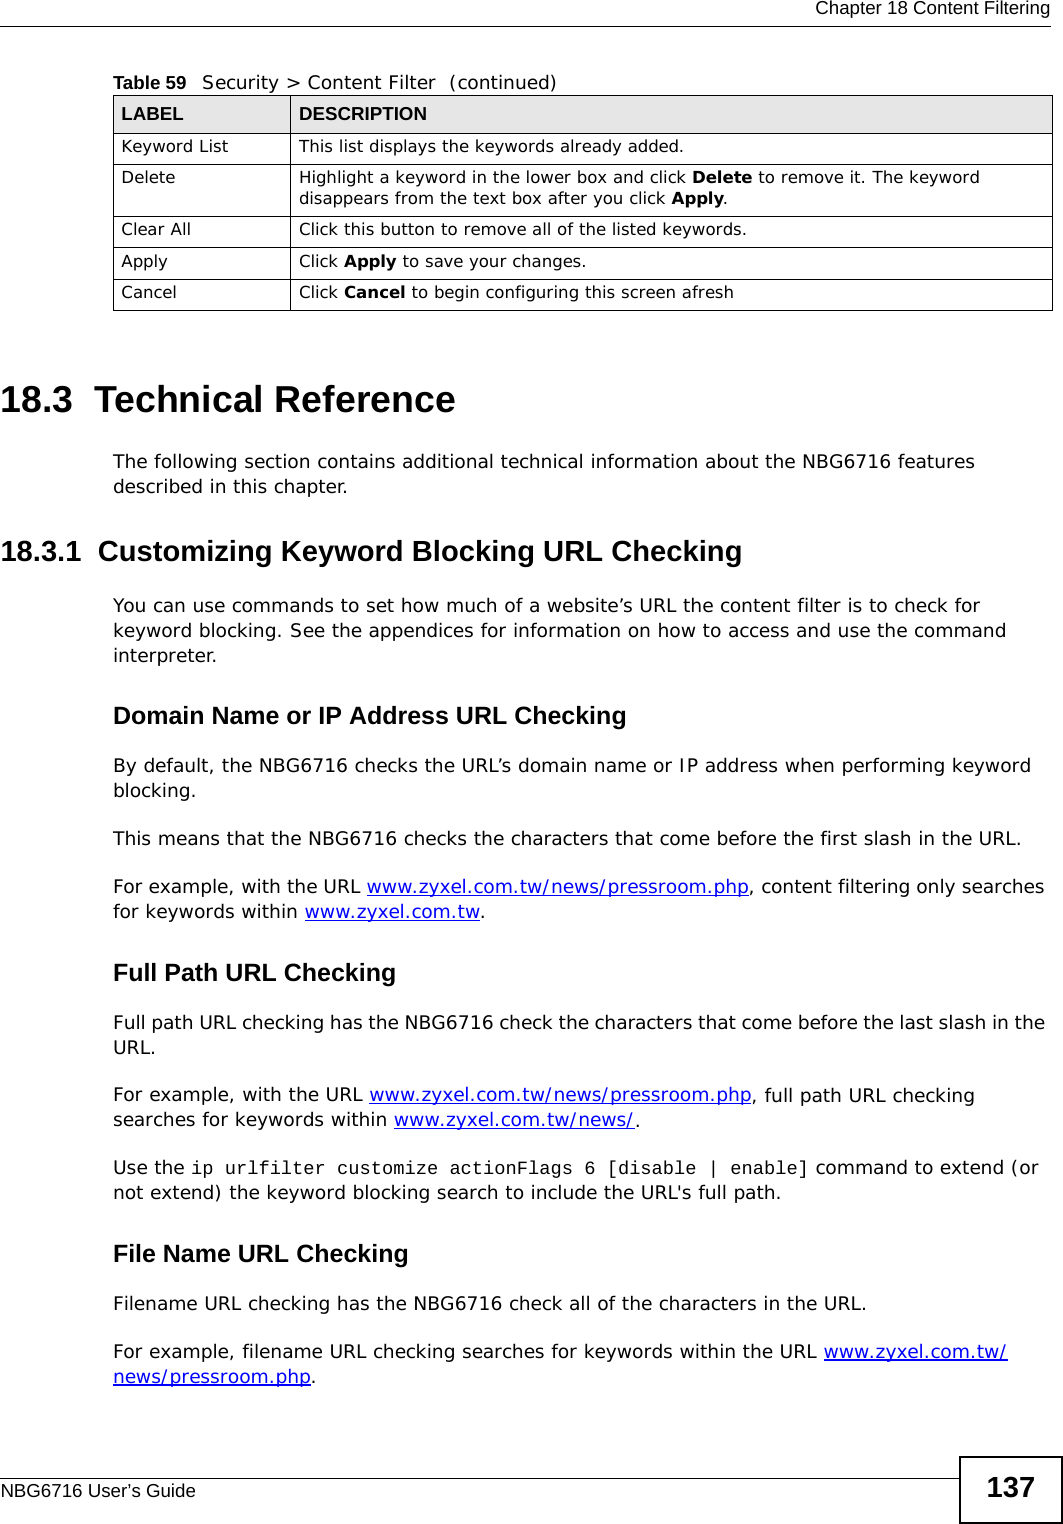  Chapter 18 Content FilteringNBG6716 User’s Guide 13718.3  Technical ReferenceThe following section contains additional technical information about the NBG6716 features described in this chapter.18.3.1  Customizing Keyword Blocking URL CheckingYou can use commands to set how much of a website’s URL the content filter is to check for keyword blocking. See the appendices for information on how to access and use the command interpreter.Domain Name or IP Address URL CheckingBy default, the NBG6716 checks the URL’s domain name or IP address when performing keyword blocking.This means that the NBG6716 checks the characters that come before the first slash in the URL.For example, with the URL www.zyxel.com.tw/news/pressroom.php, content filtering only searches for keywords within www.zyxel.com.tw.Full Path URL CheckingFull path URL checking has the NBG6716 check the characters that come before the last slash in the URL.For example, with the URL www.zyxel.com.tw/news/pressroom.php, full path URL checking searches for keywords within www.zyxel.com.tw/news/.Use the ip urlfilter customize actionFlags 6 [disable | enable] command to extend (or not extend) the keyword blocking search to include the URL&apos;s full path.File Name URL CheckingFilename URL checking has the NBG6716 check all of the characters in the URL.For example, filename URL checking searches for keywords within the URL www.zyxel.com.tw/news/pressroom.php.Keyword List This list displays the keywords already added. Delete Highlight a keyword in the lower box and click Delete to remove it. The keyword disappears from the text box after you click Apply.Clear All Click this button to remove all of the listed keywords.Apply Click Apply to save your changes.Cancel Click Cancel to begin configuring this screen afreshTable 59   Security &gt; Content Filter  (continued)LABEL DESCRIPTION